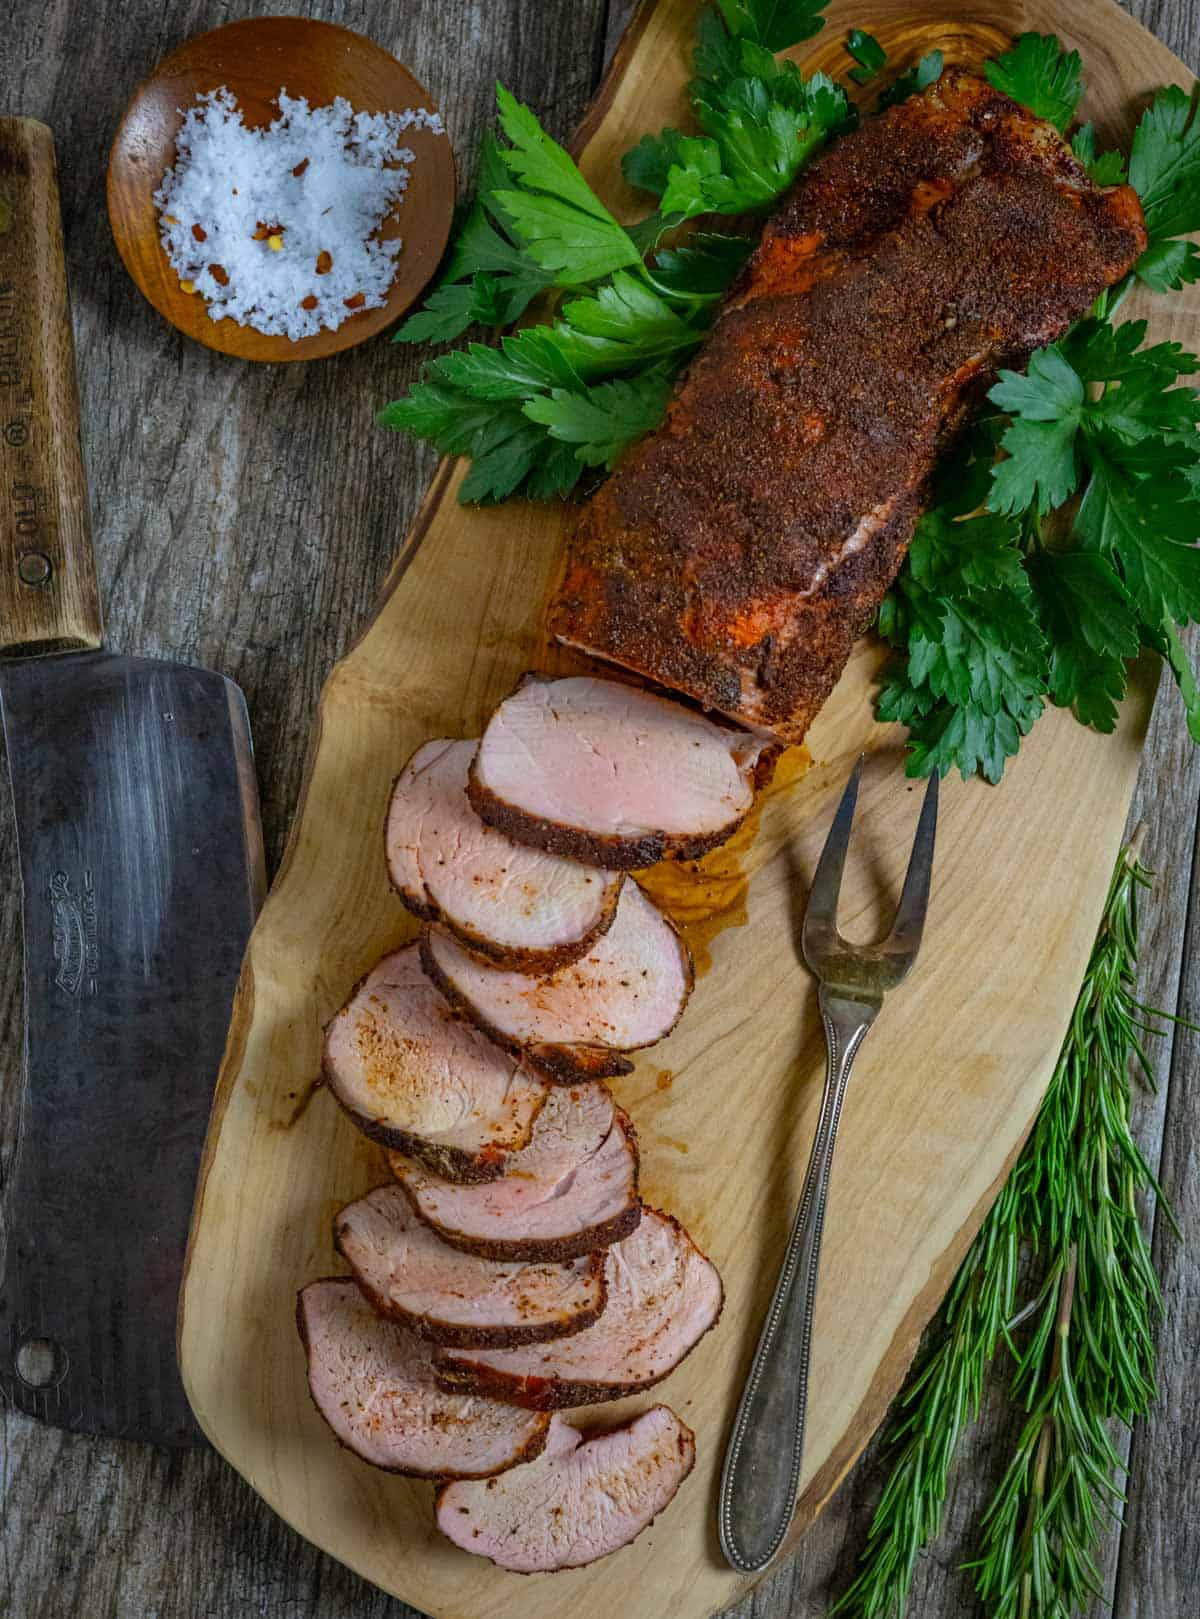 Pork tenderloin sliced halfway on a board with knife and carving fork.